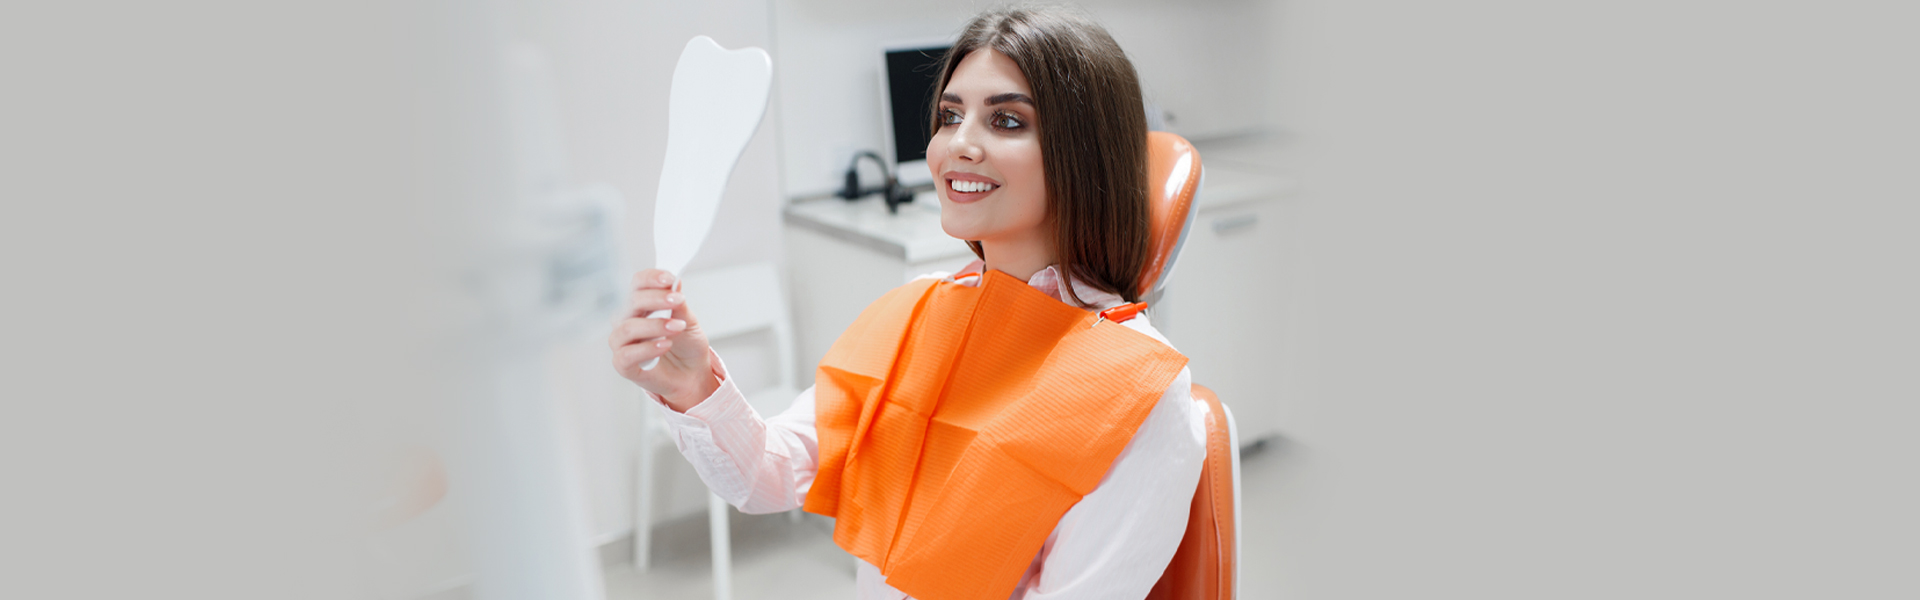 How Often Should I Have To Go For Dental Checkup?